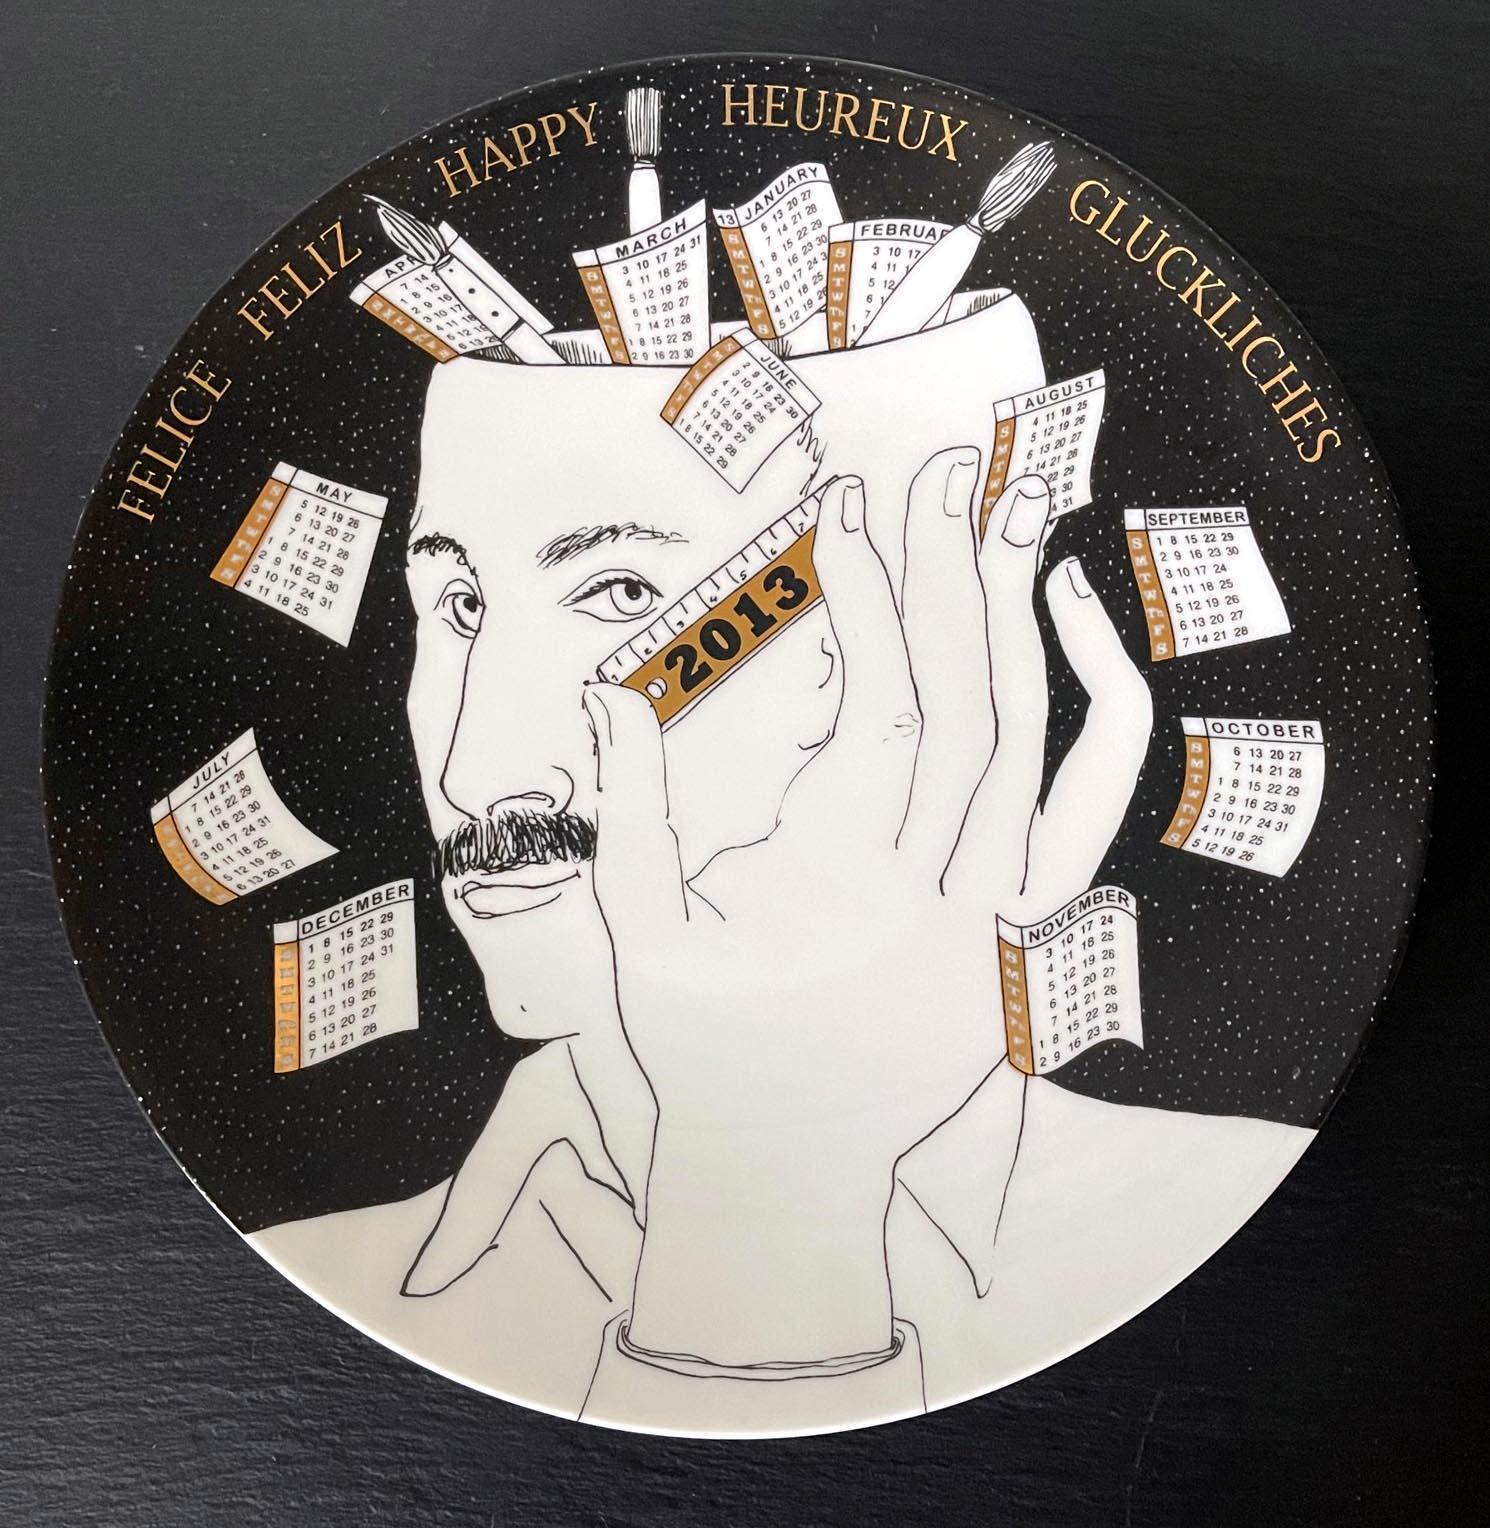 A vintage Italian decorative porcelain plate designed and made by Fornasetti. The commemorative plate is for the year of 2013. The plate was made in a limited edition of 92 out of 700. The back has the pre-drilled looping holes for wall display, and